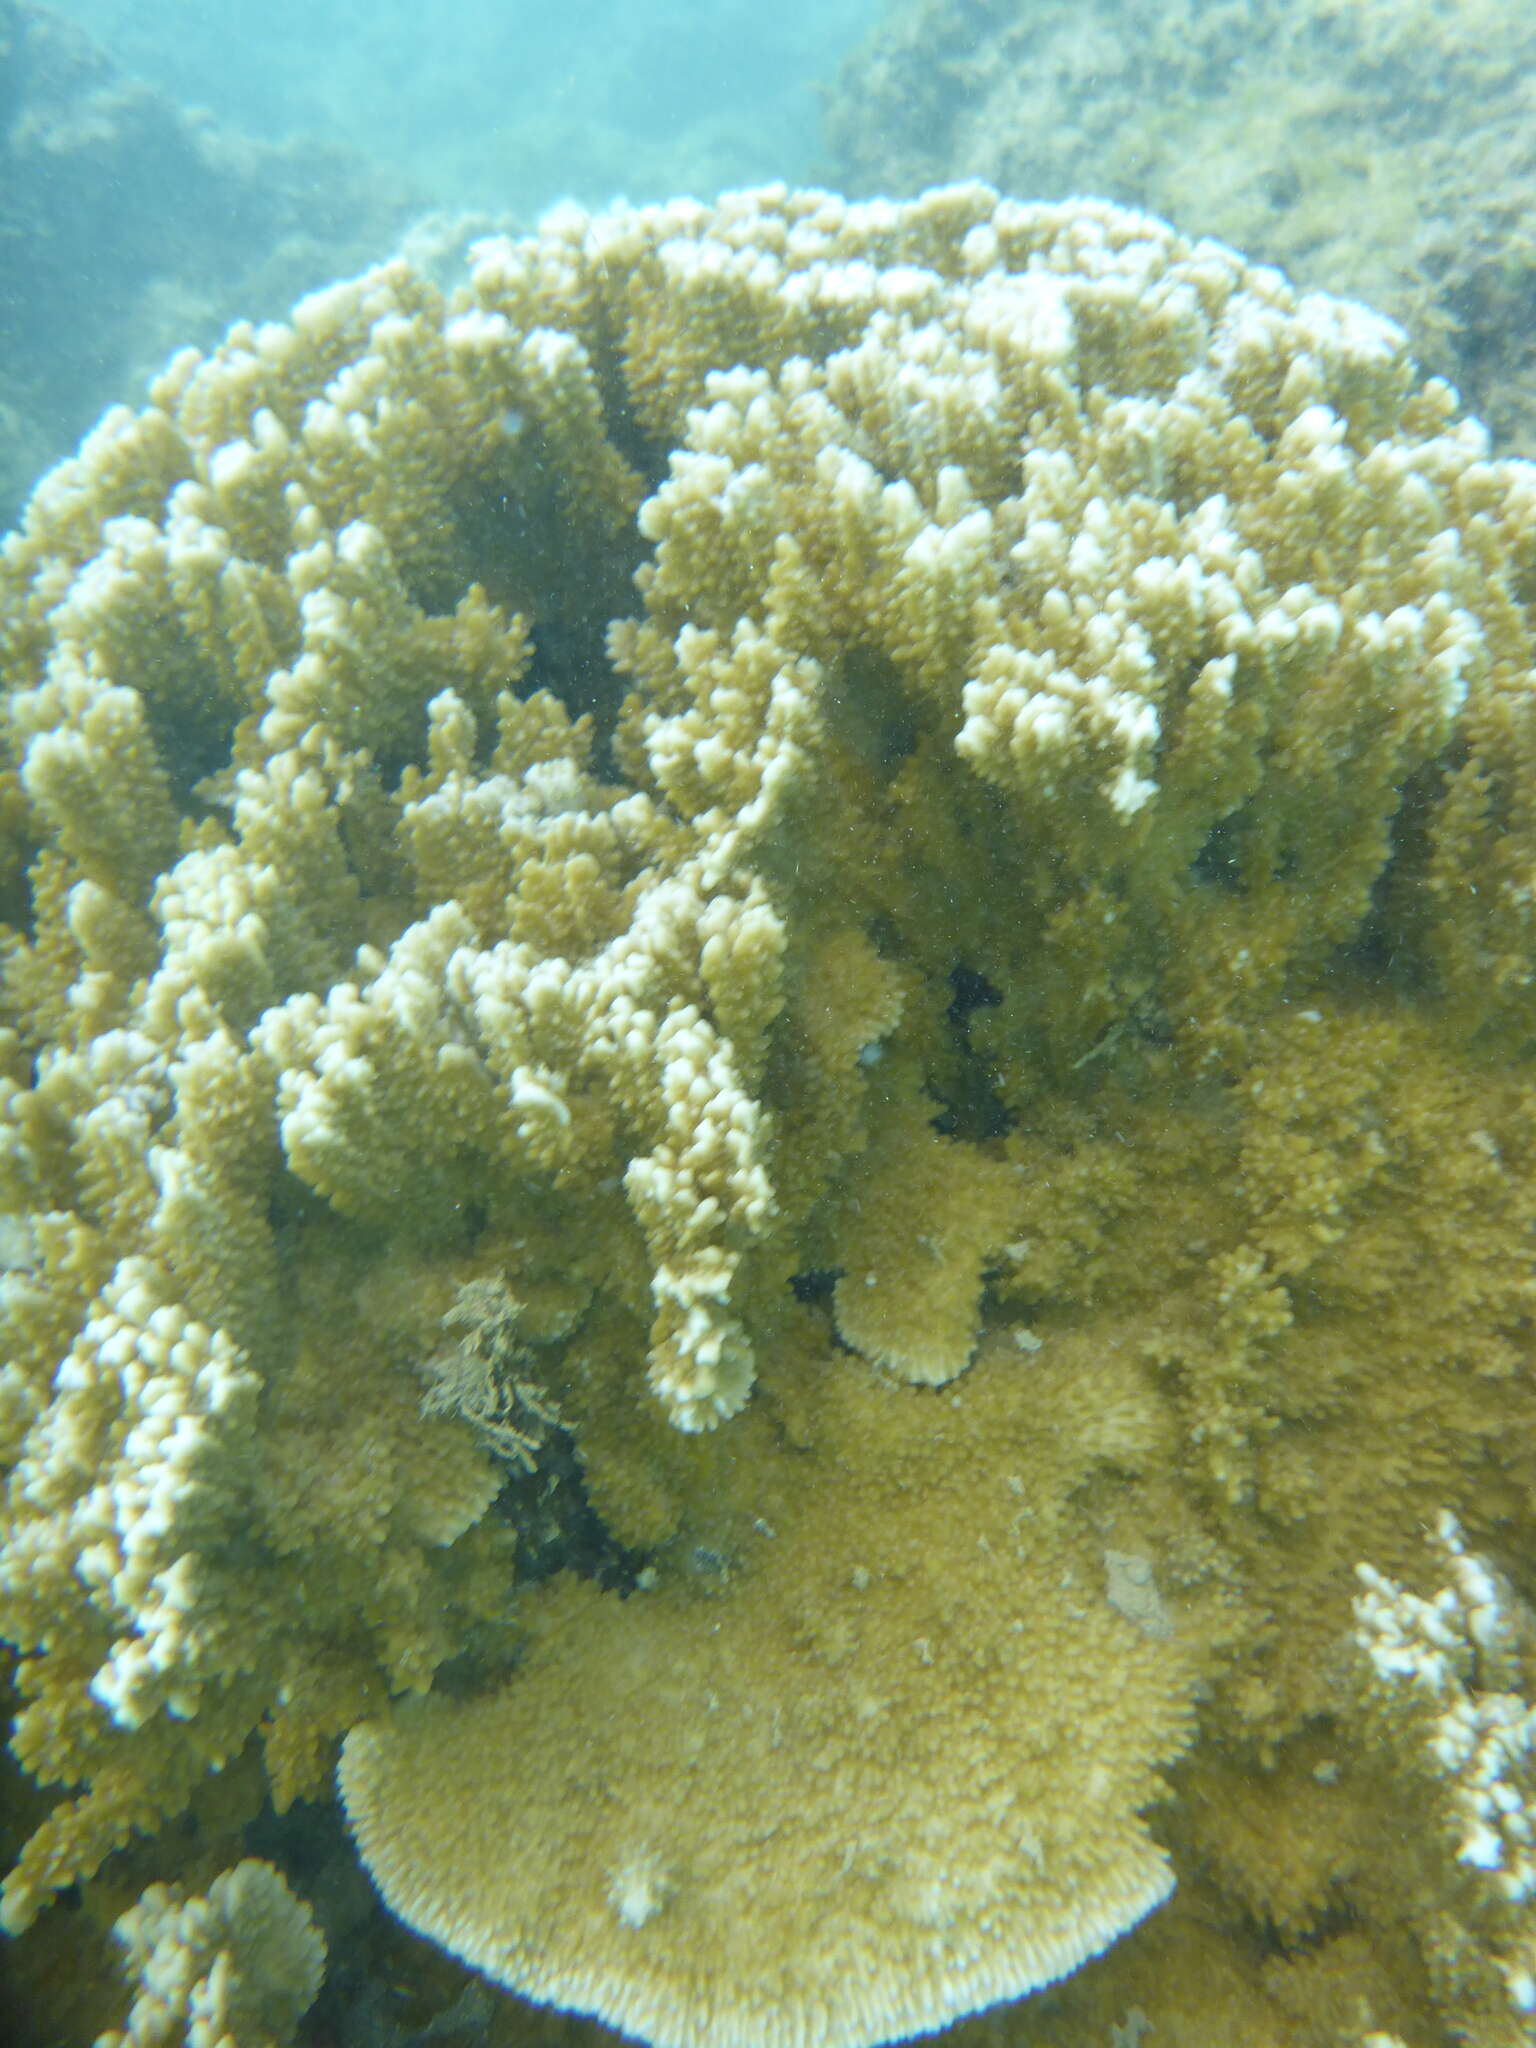 Image of Rice coral